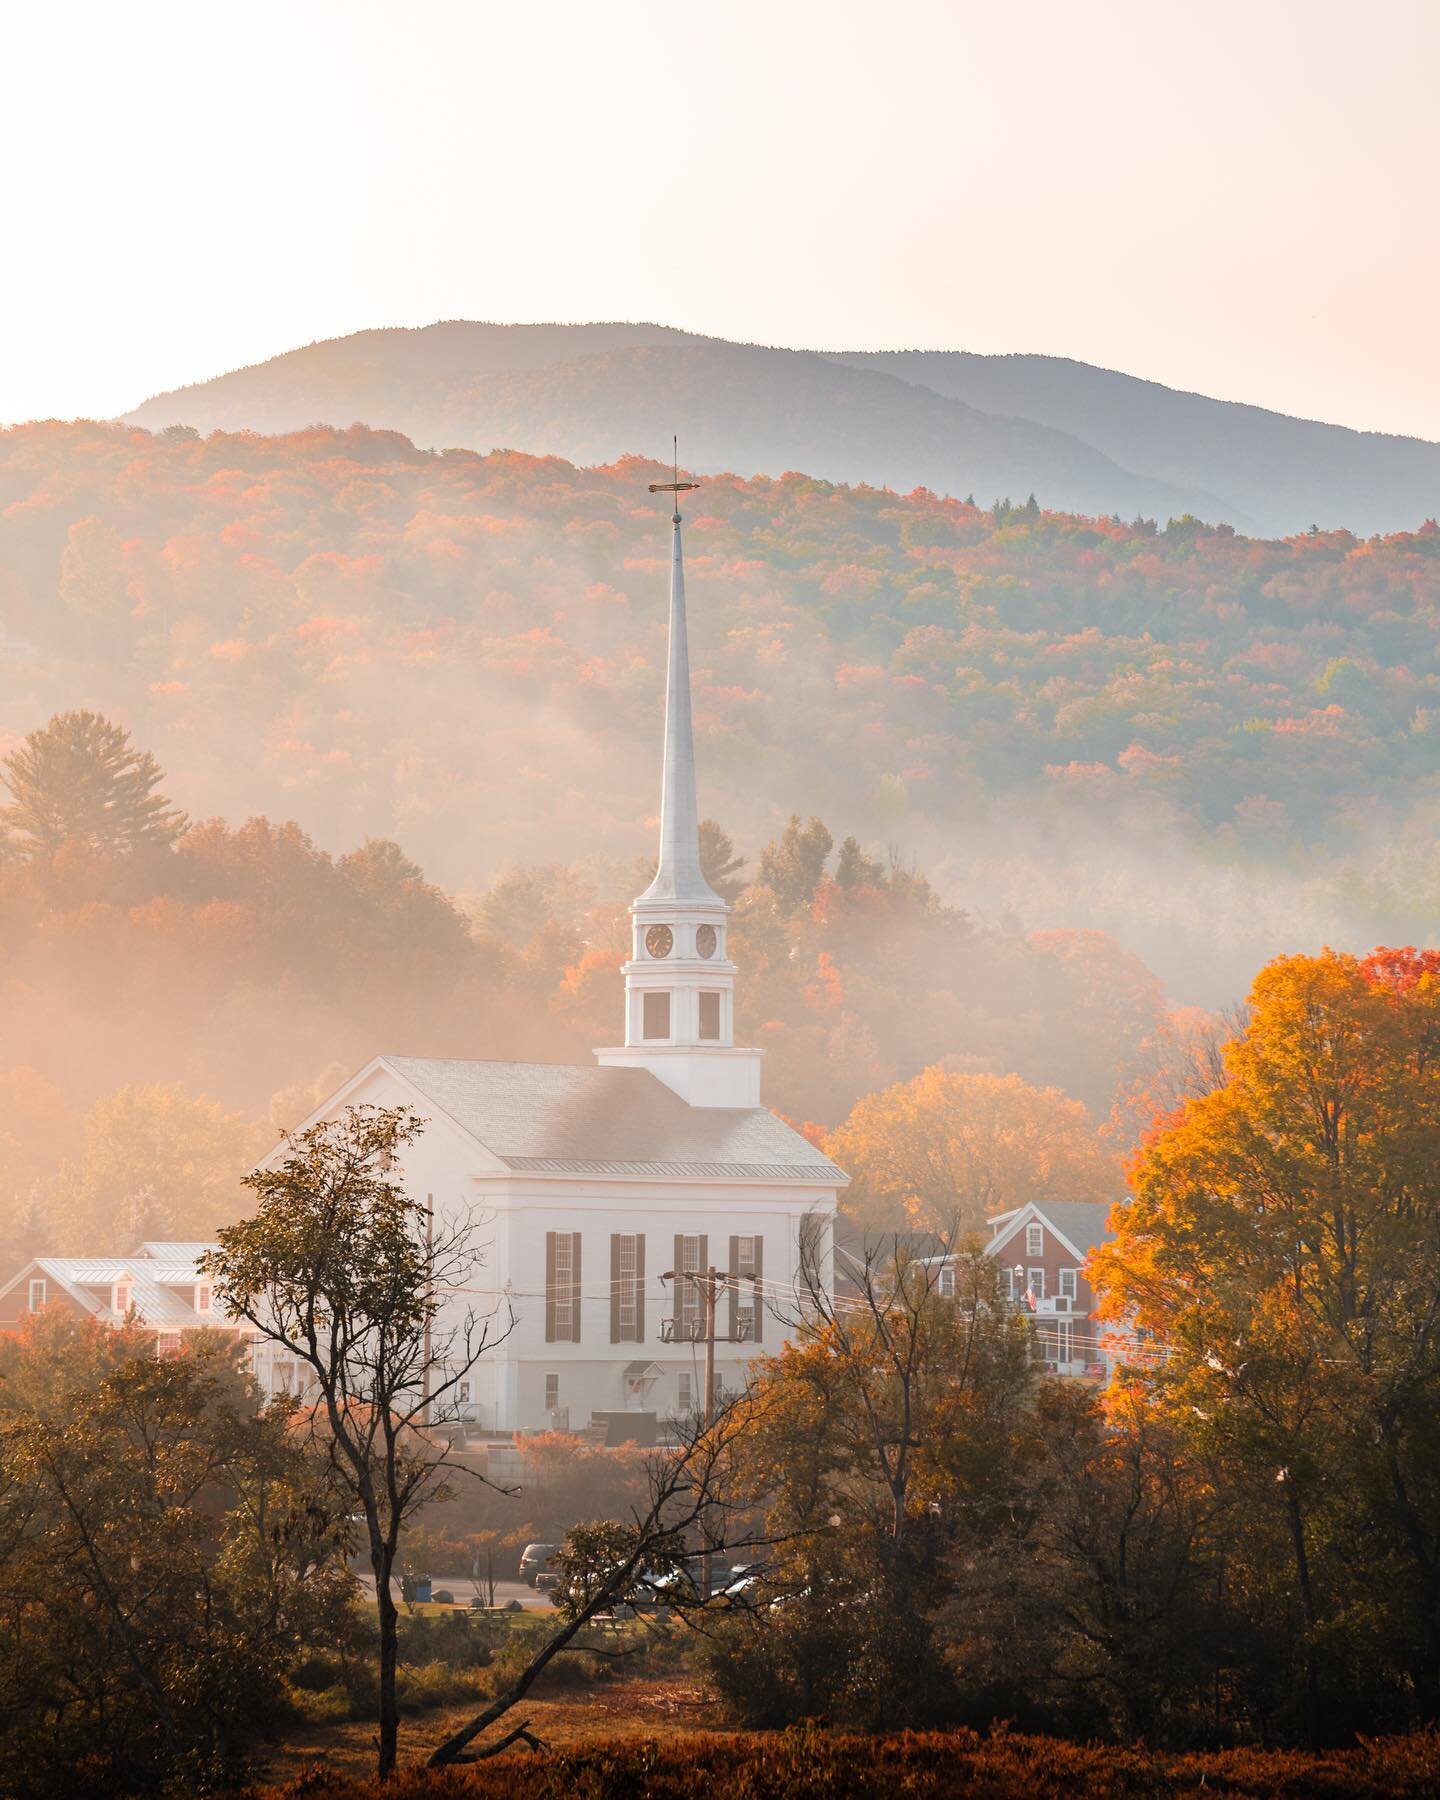 Early morning fog in Stowe, Vermont 🍁🍂 

While in Vermont this fall, I got early to experience sunrise in downtown Stowe, Vermont. When I arrived the town was completely fogged in with only a few hundred feet of visibility. The fog slowly cleared r